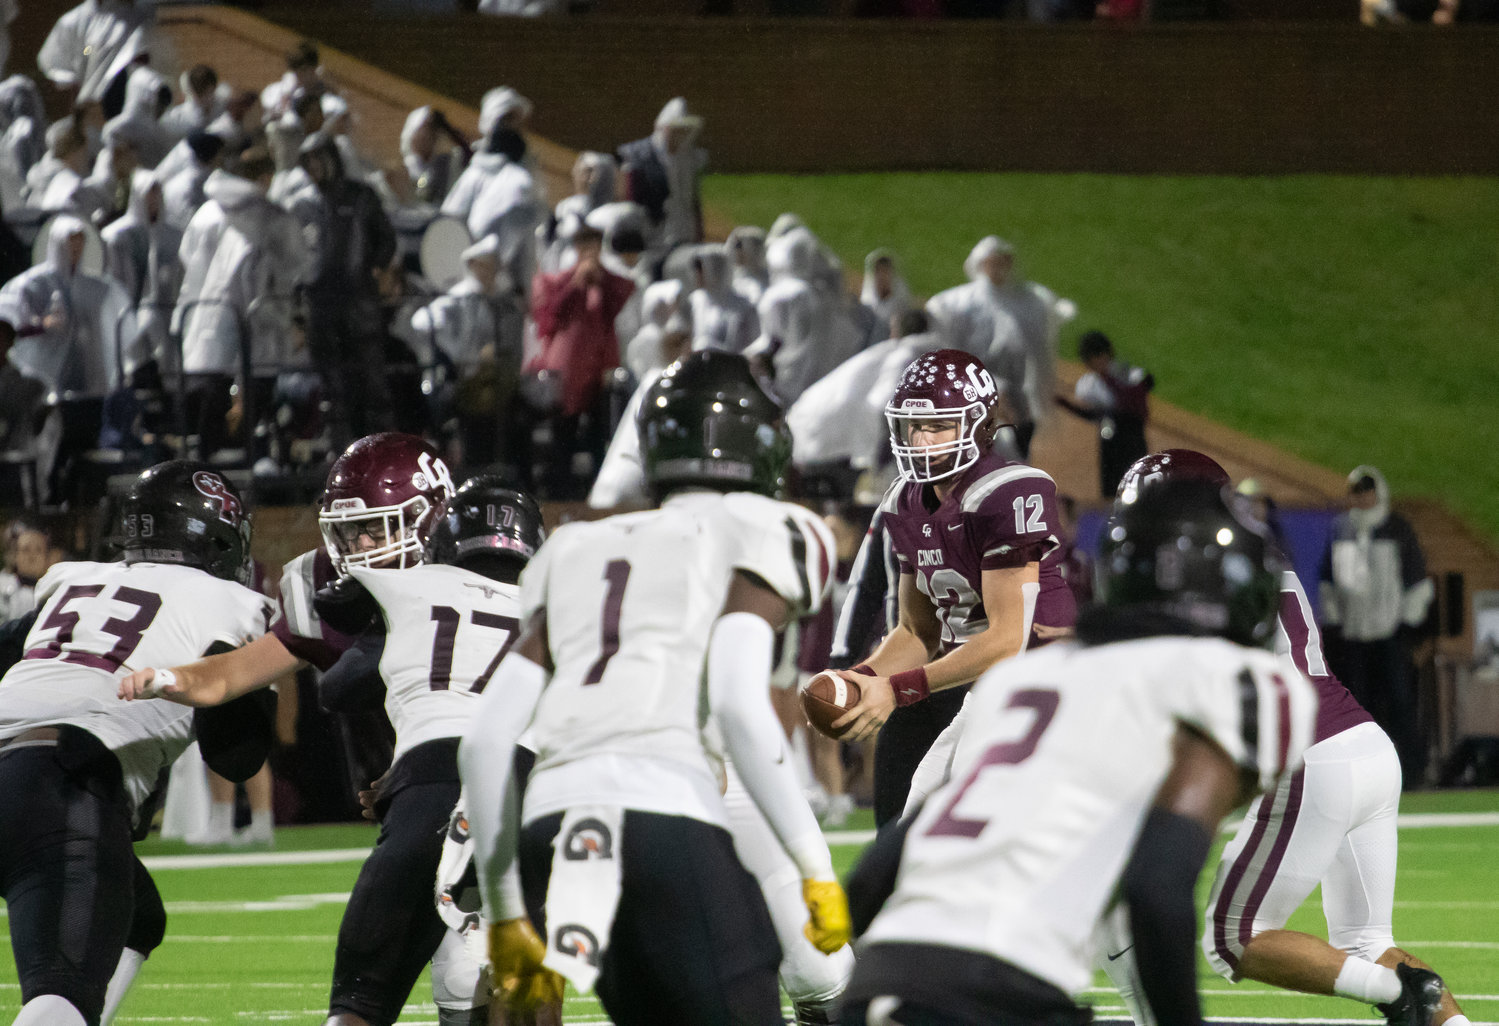 Gavin Rutherford takes a snap during Friday's game between Cinco Ranch and George Ranch at Rhodes Stadium.